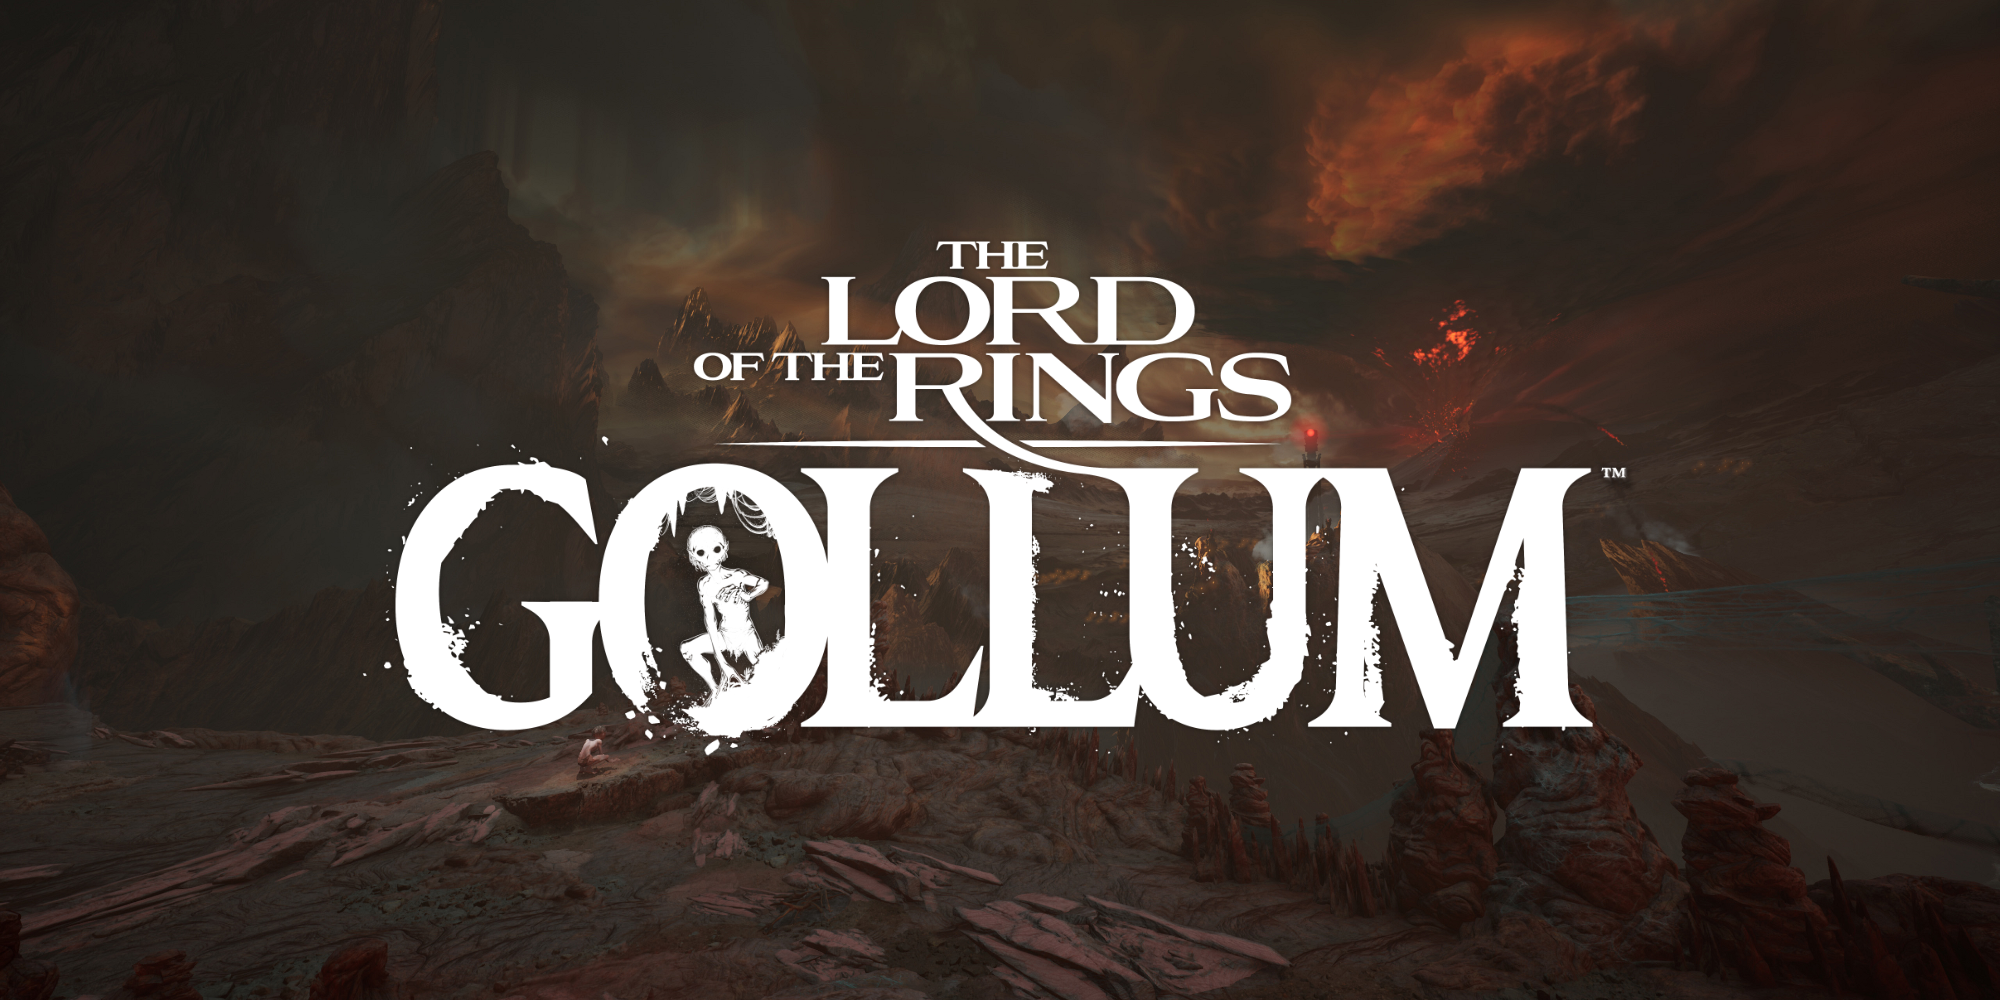 The Lord of the Rings: Gollum's logo superimposed on a landscape of Mordor, covered in volcanic rock and jagged peaks.